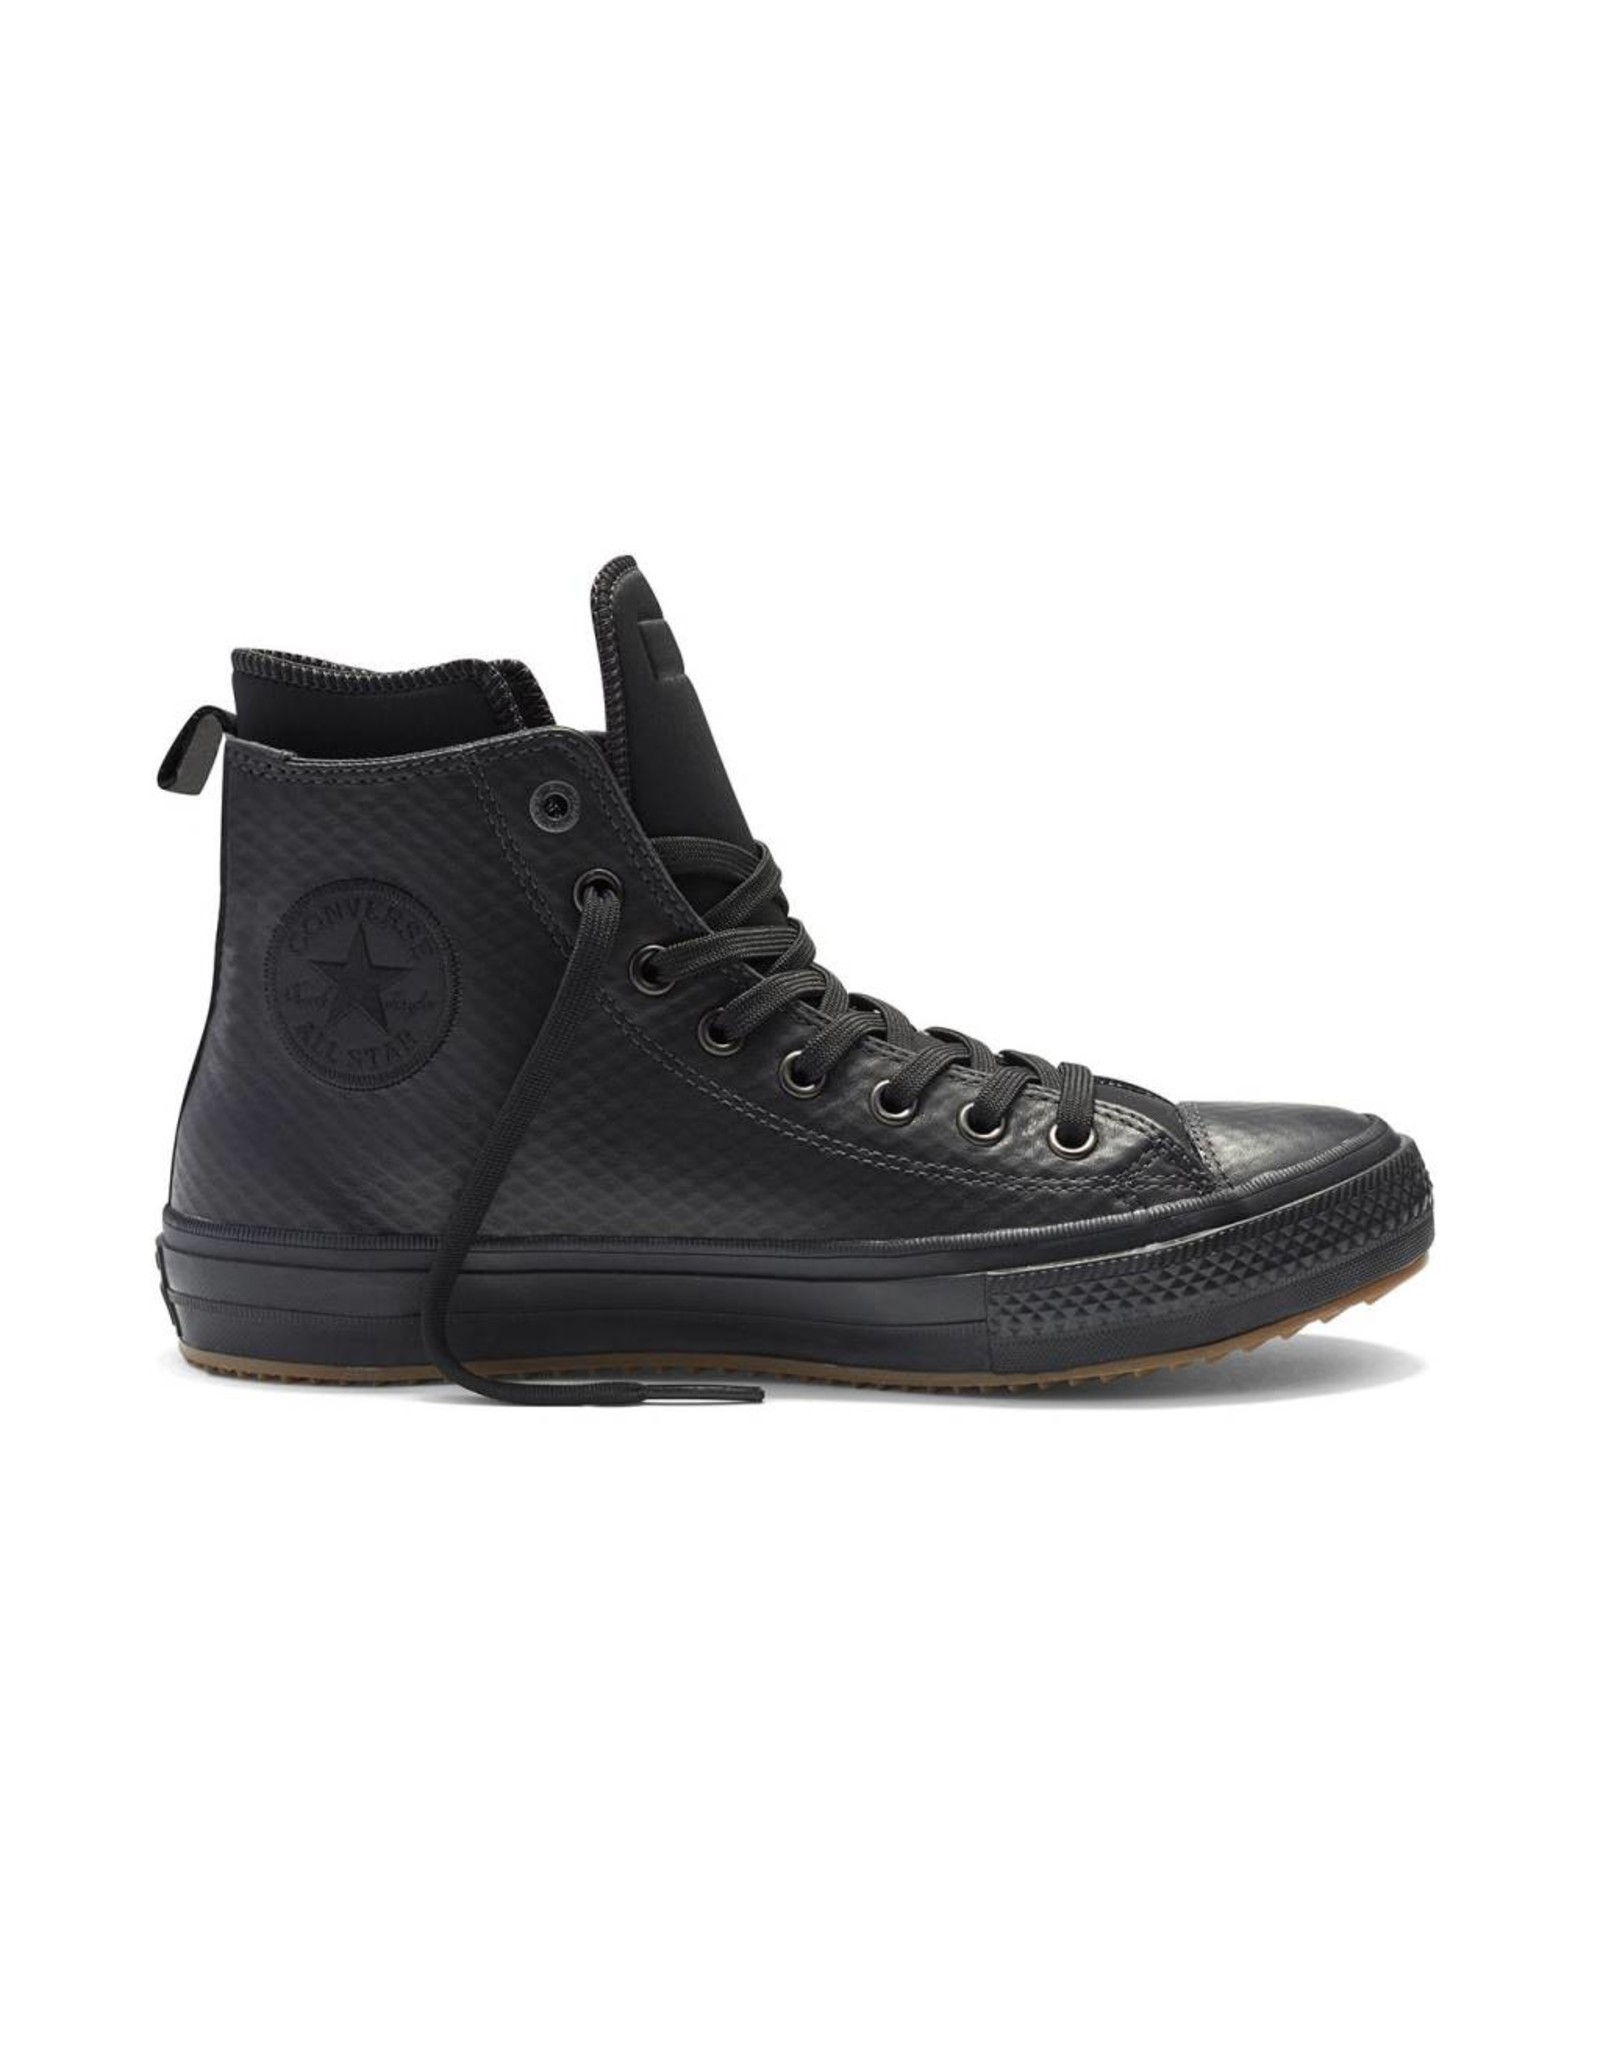 converse chuck taylor ii leather